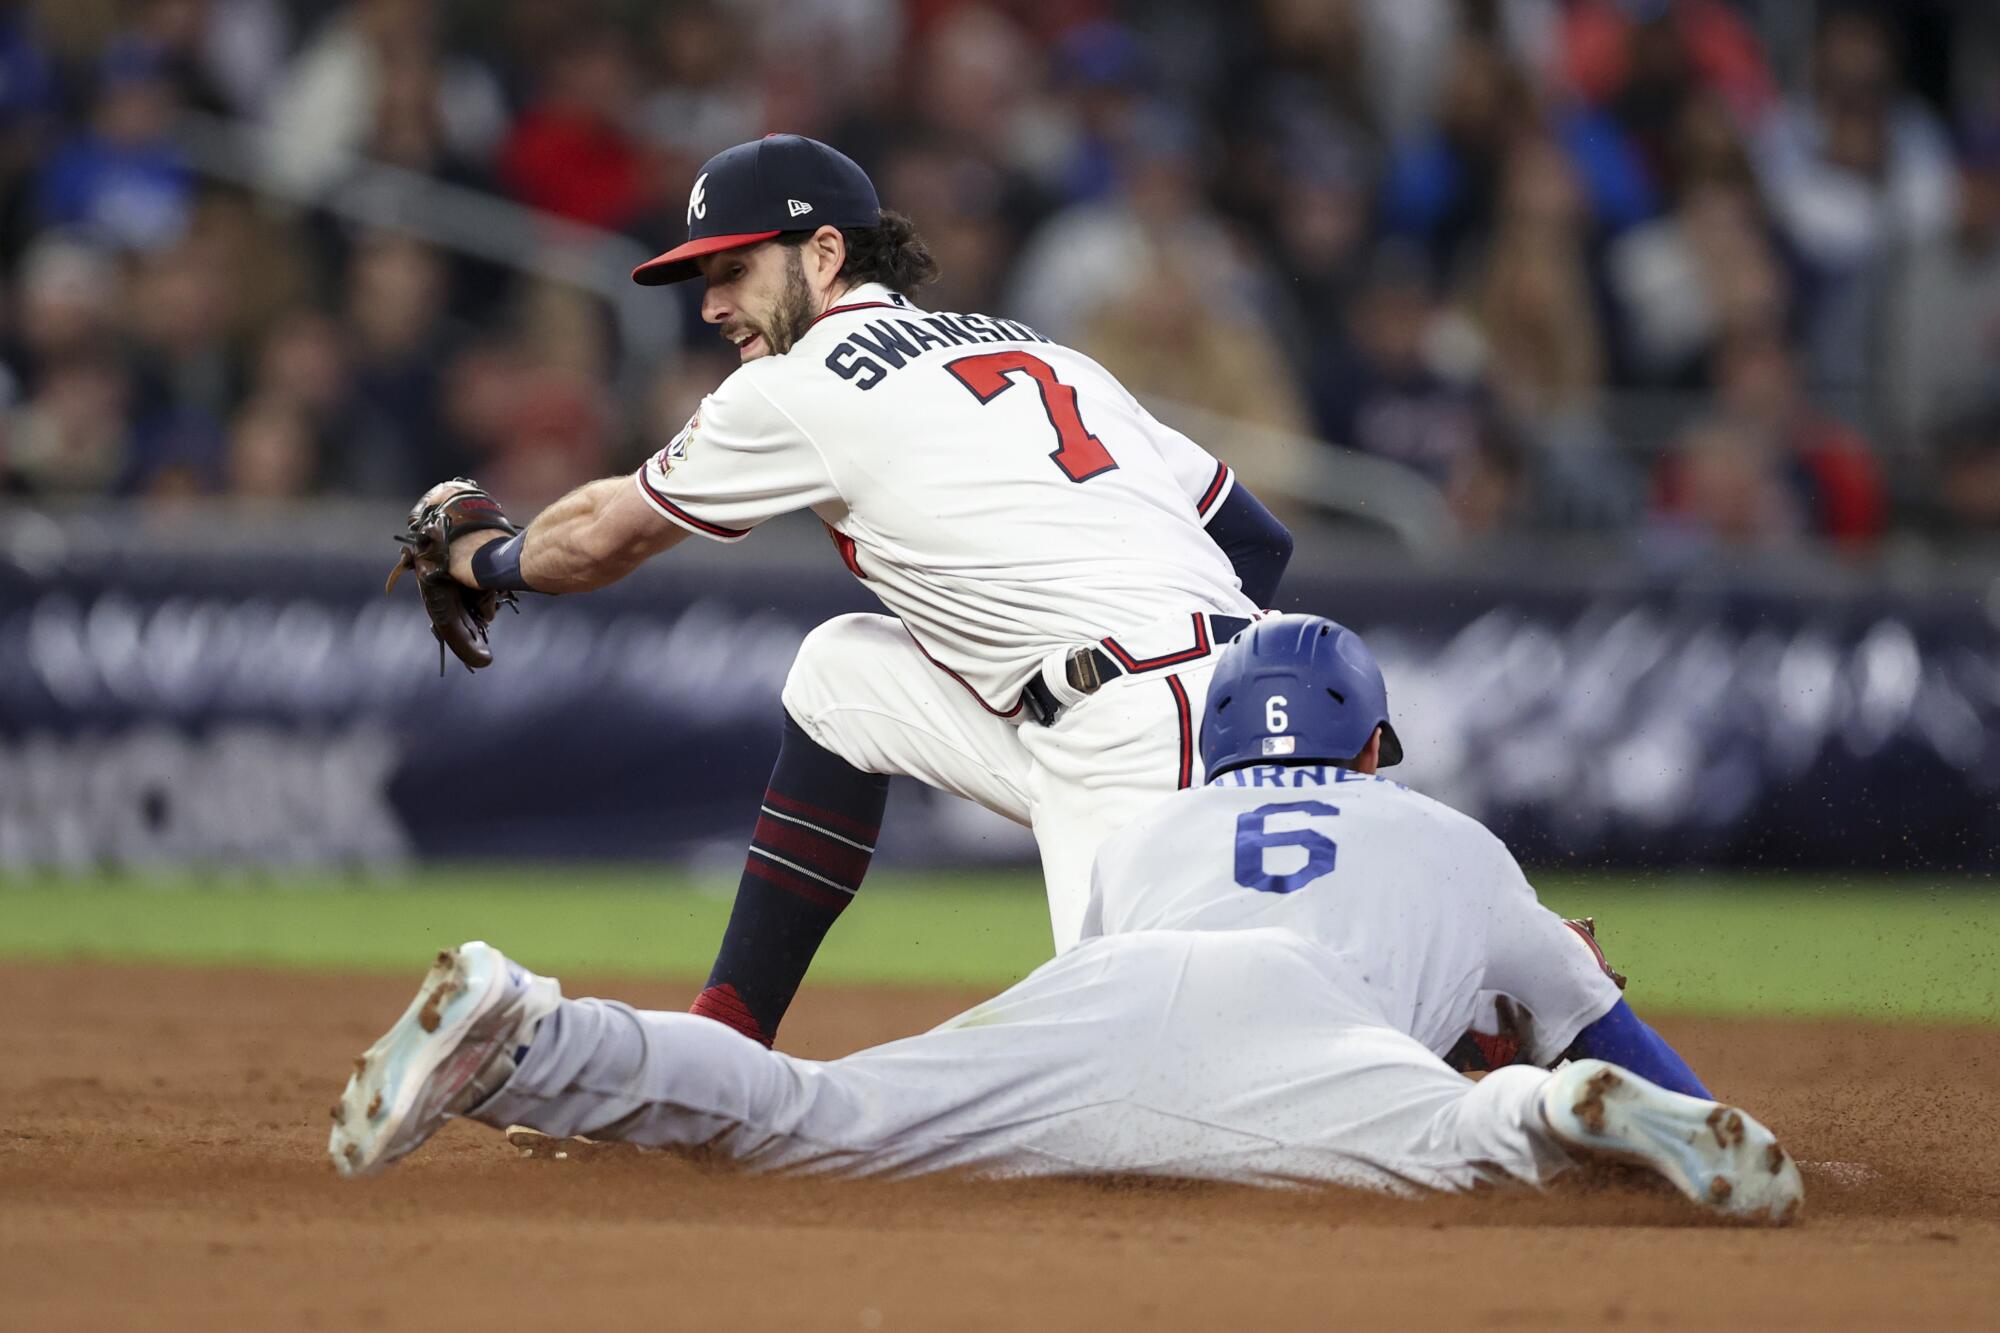 Dodgers' Trea Turner slides into second ahead of the tag by Braves shortstop Dansby Swanson to steal second base